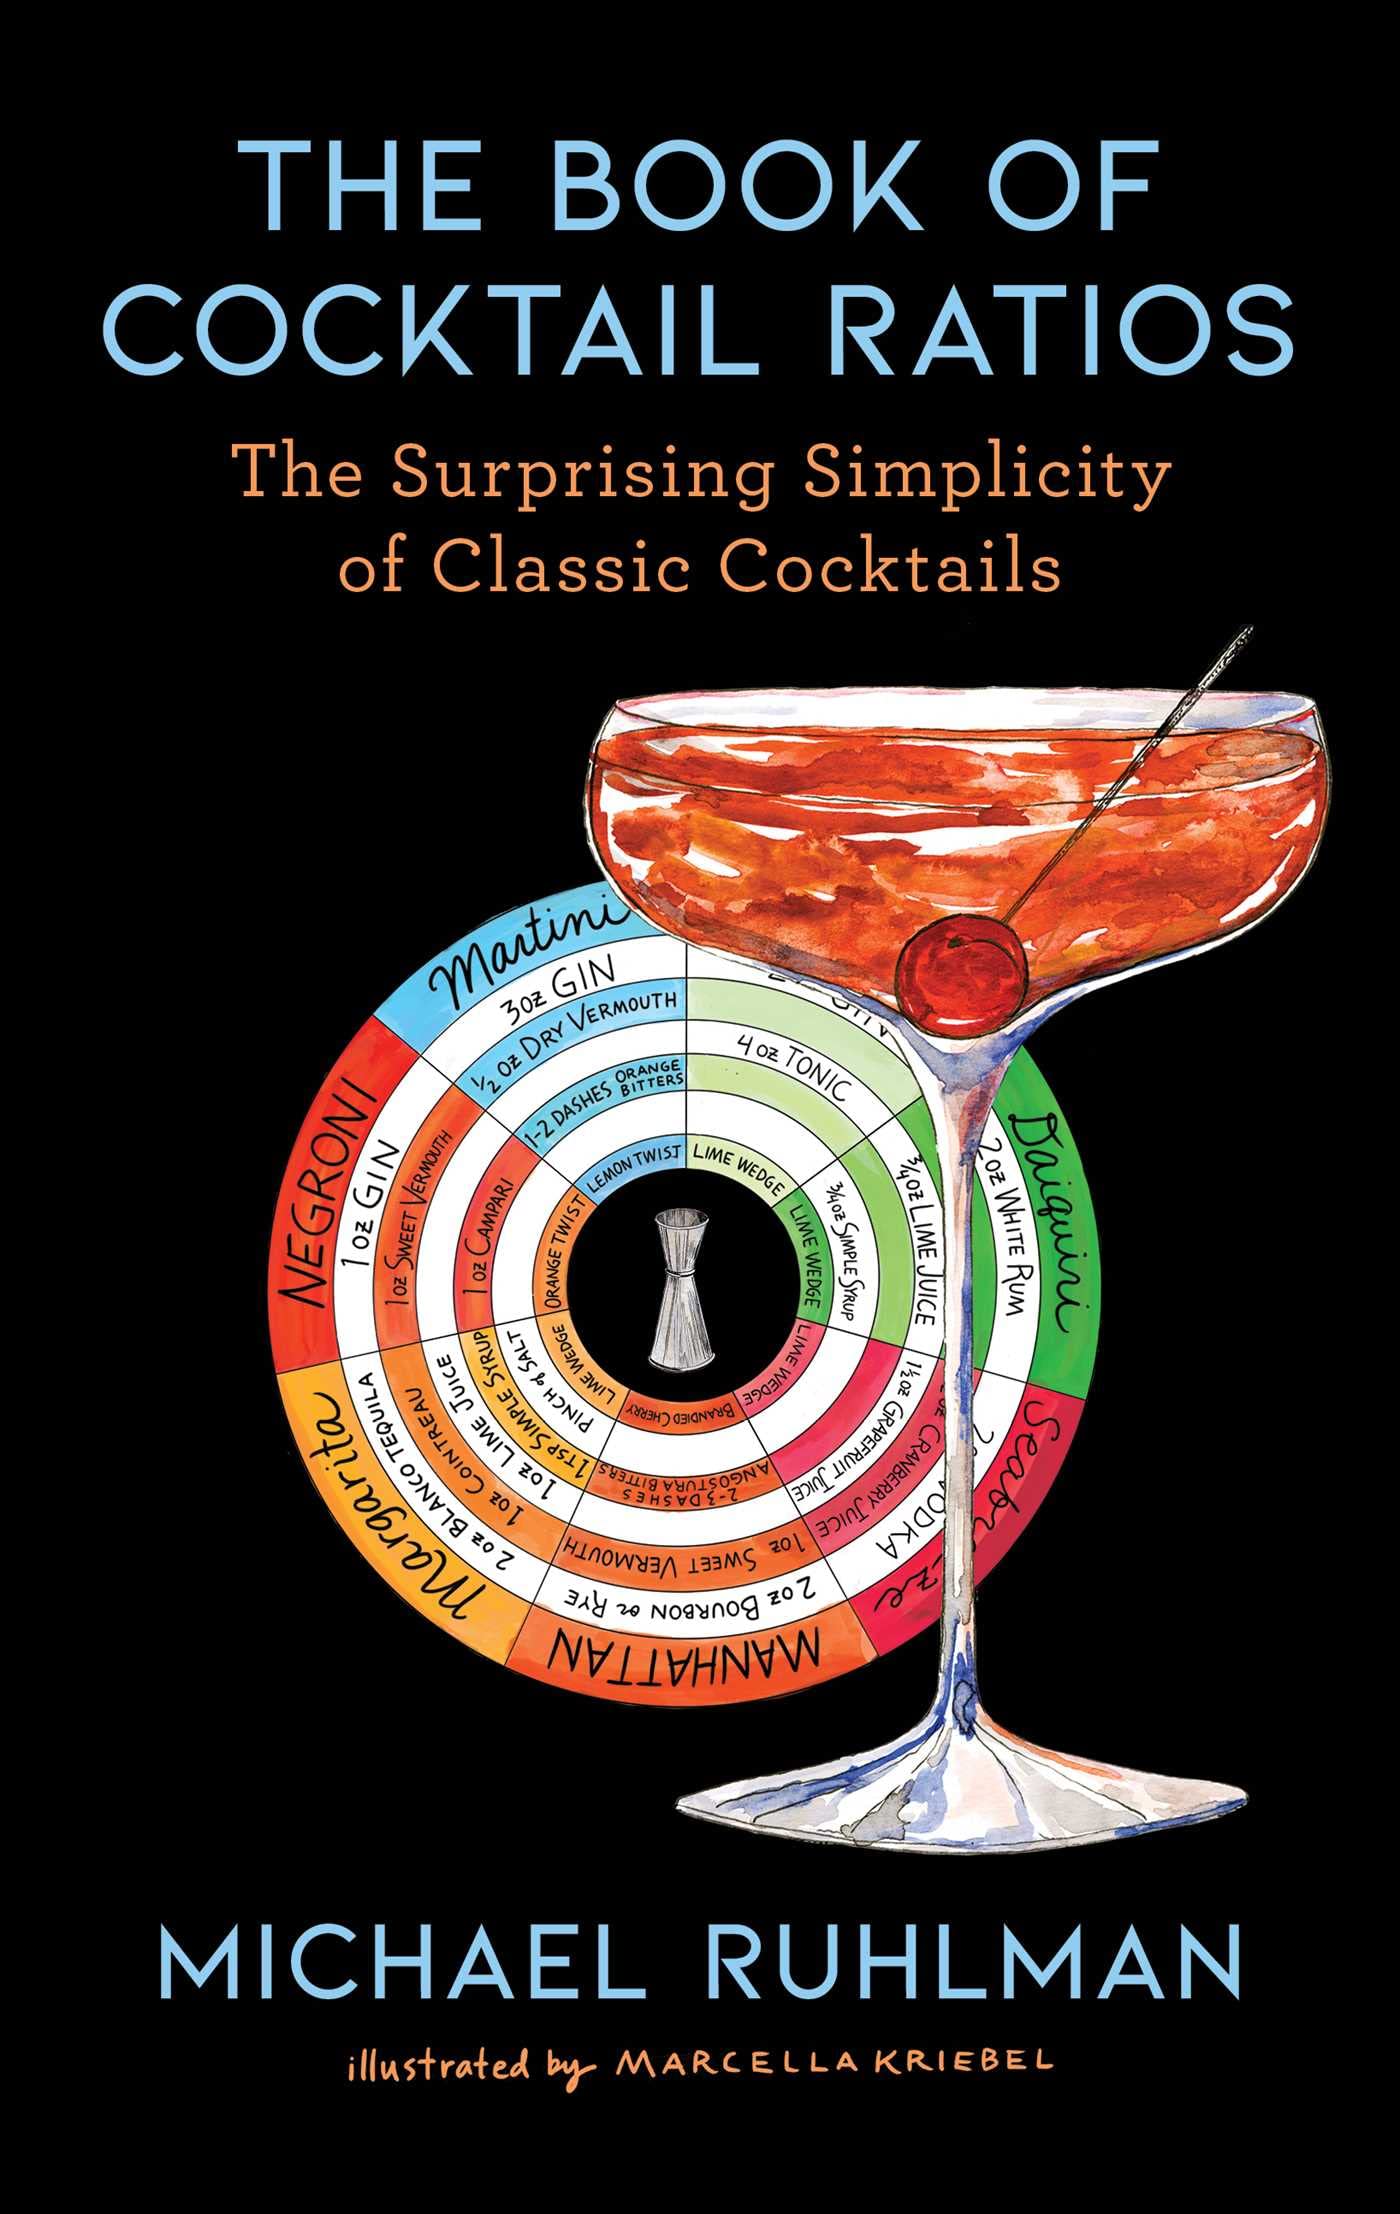 The Book of Cocktail Ratios: The Surprising Simplicity of Classic Cocktails *SIGNED* (Michael Ruhlman)